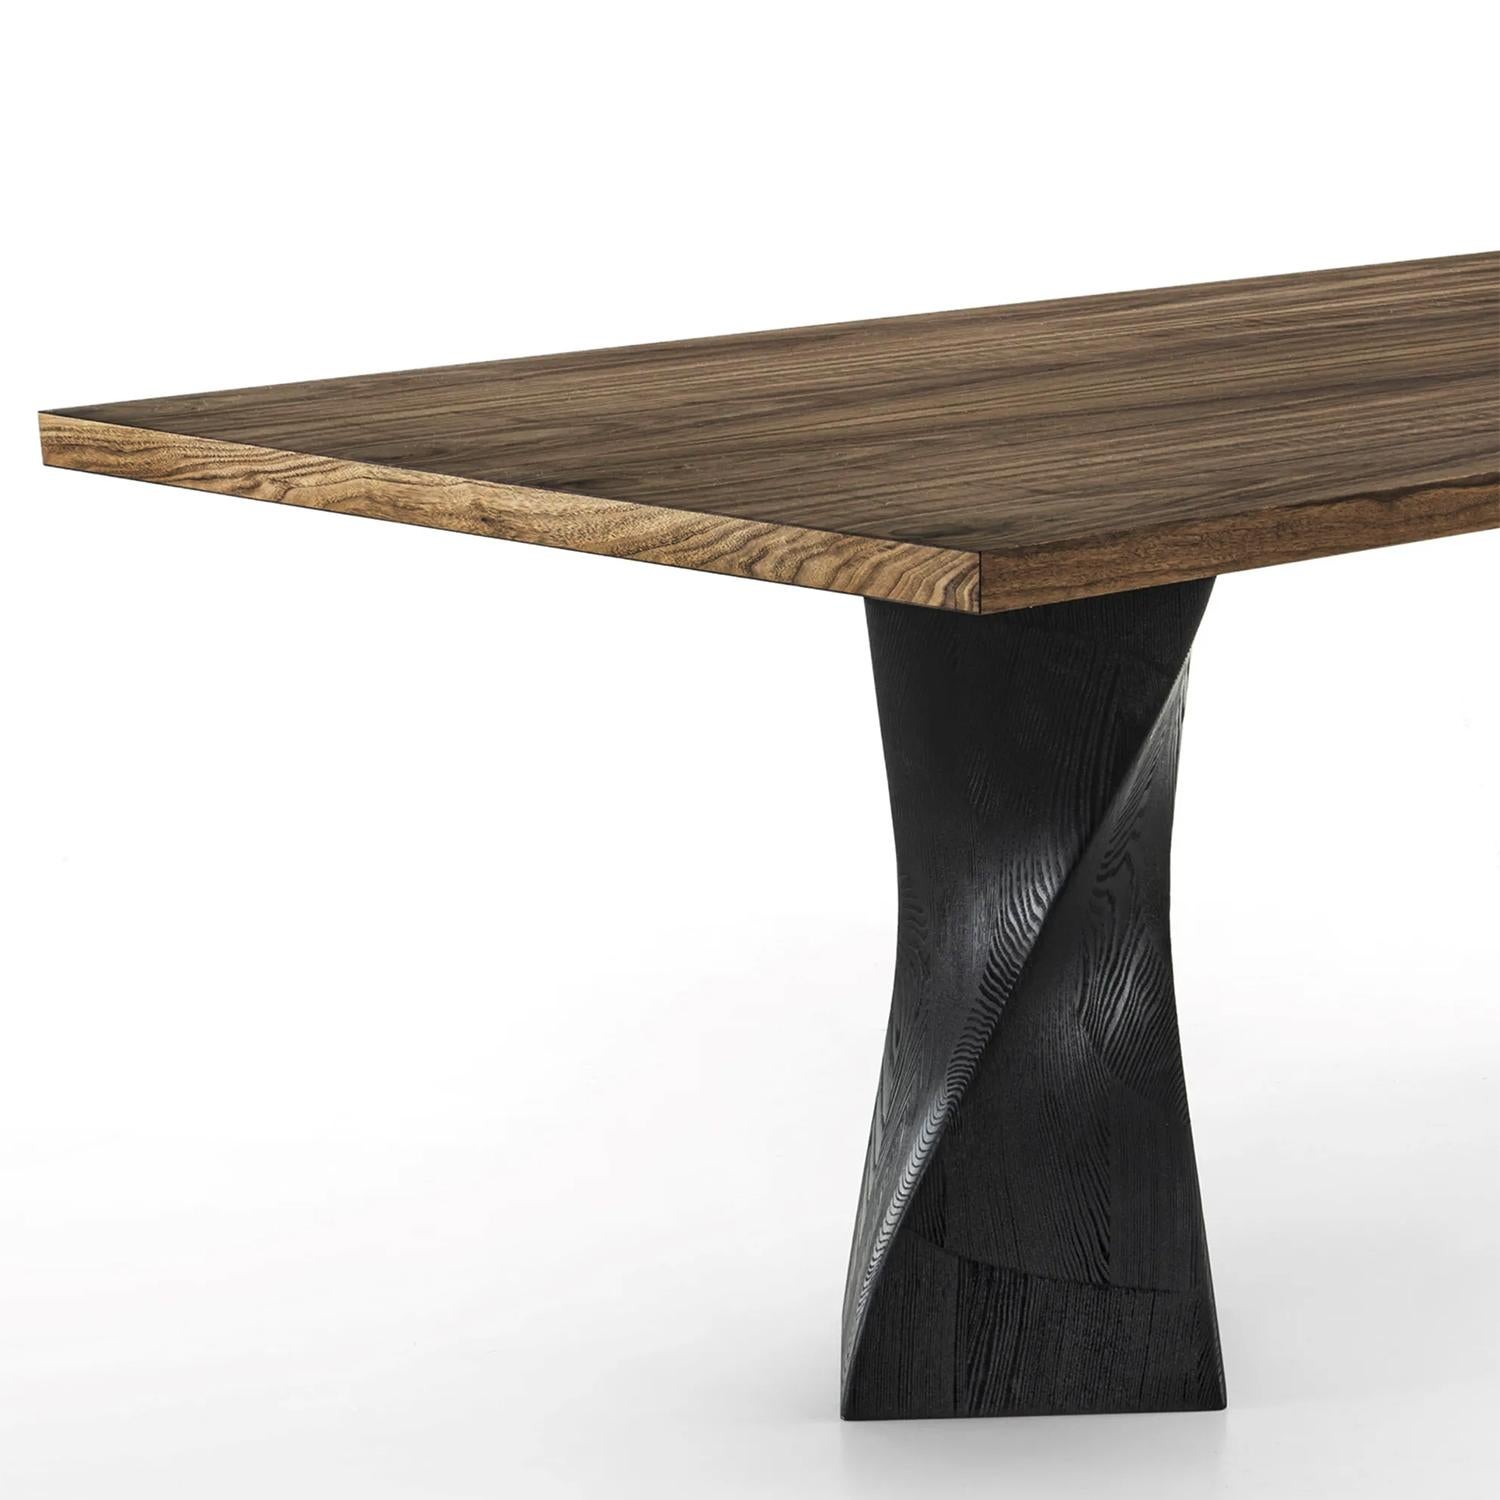 Dining Table Torsade Walnut with top made with 
blockboard veneered walnut with bevelled edges. 
With 2 feet in solid ash in black pigmented finish.
Also available in:
L220xD100xH75cm, price: 7900,00€
L240xD100xH75cm, price: